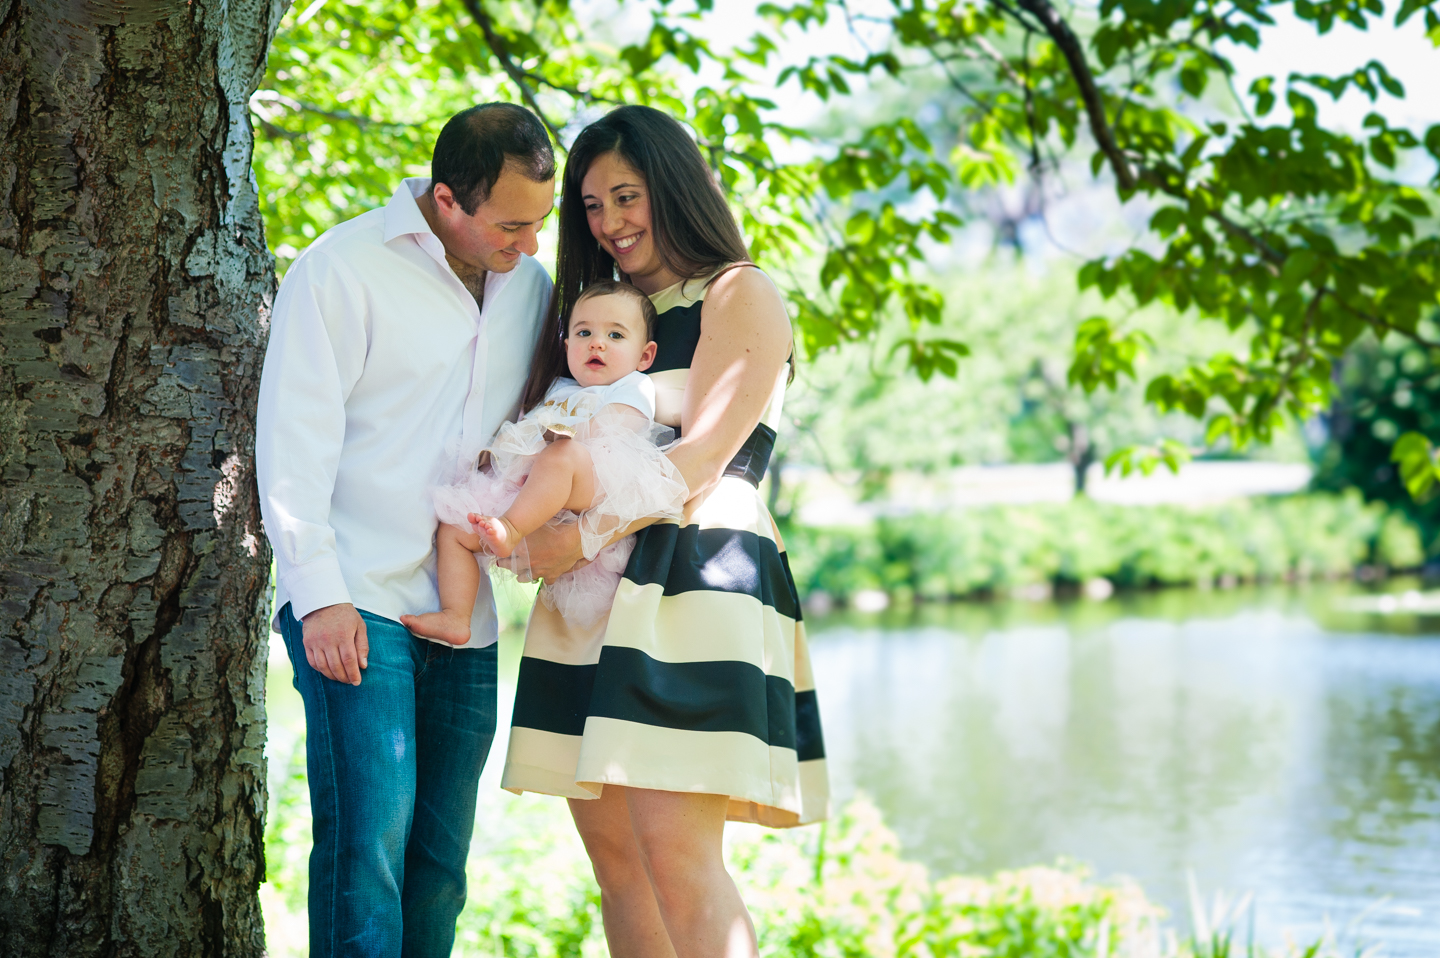 mom and dad pose with their adorable one year old daughter underneath shady trees